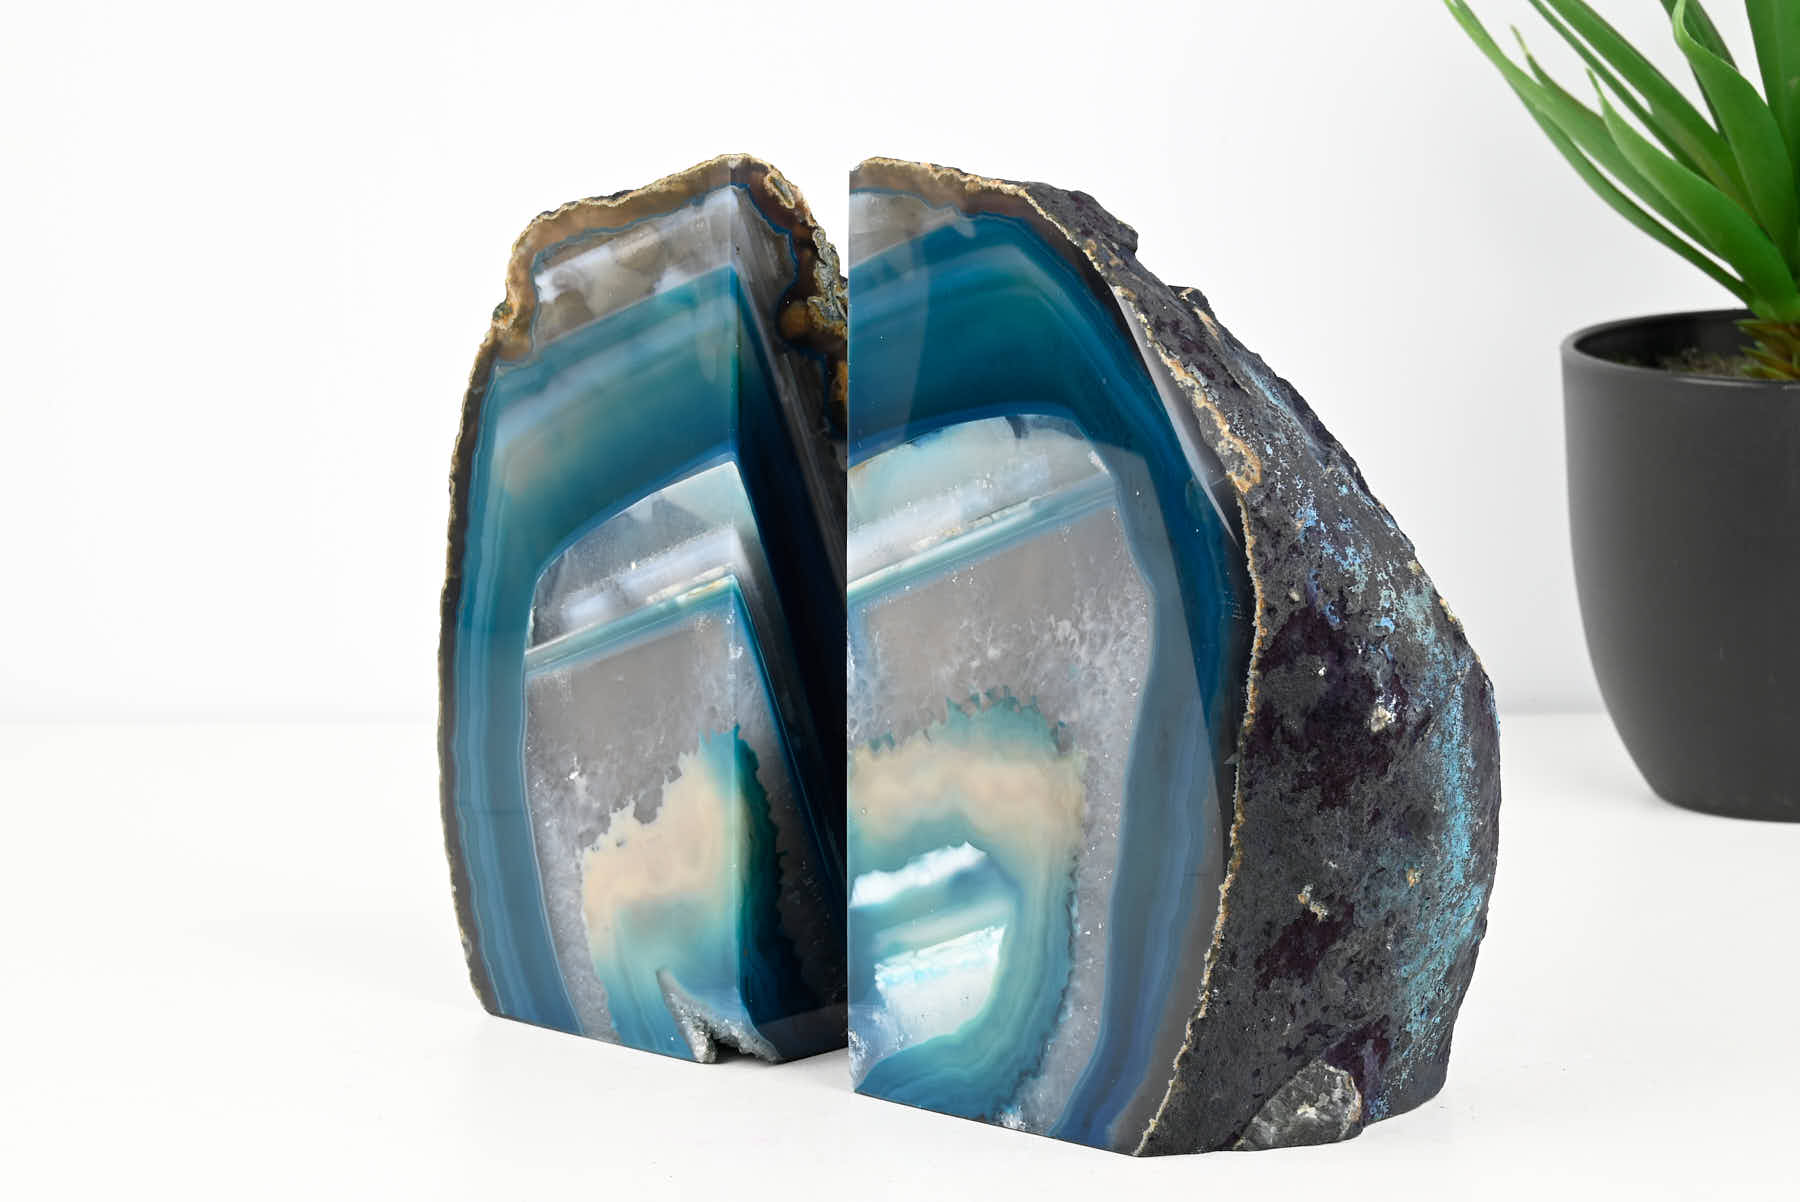 Extra Quality Teal Agate Bookends - 15cm tall - #BOTEAL-12001